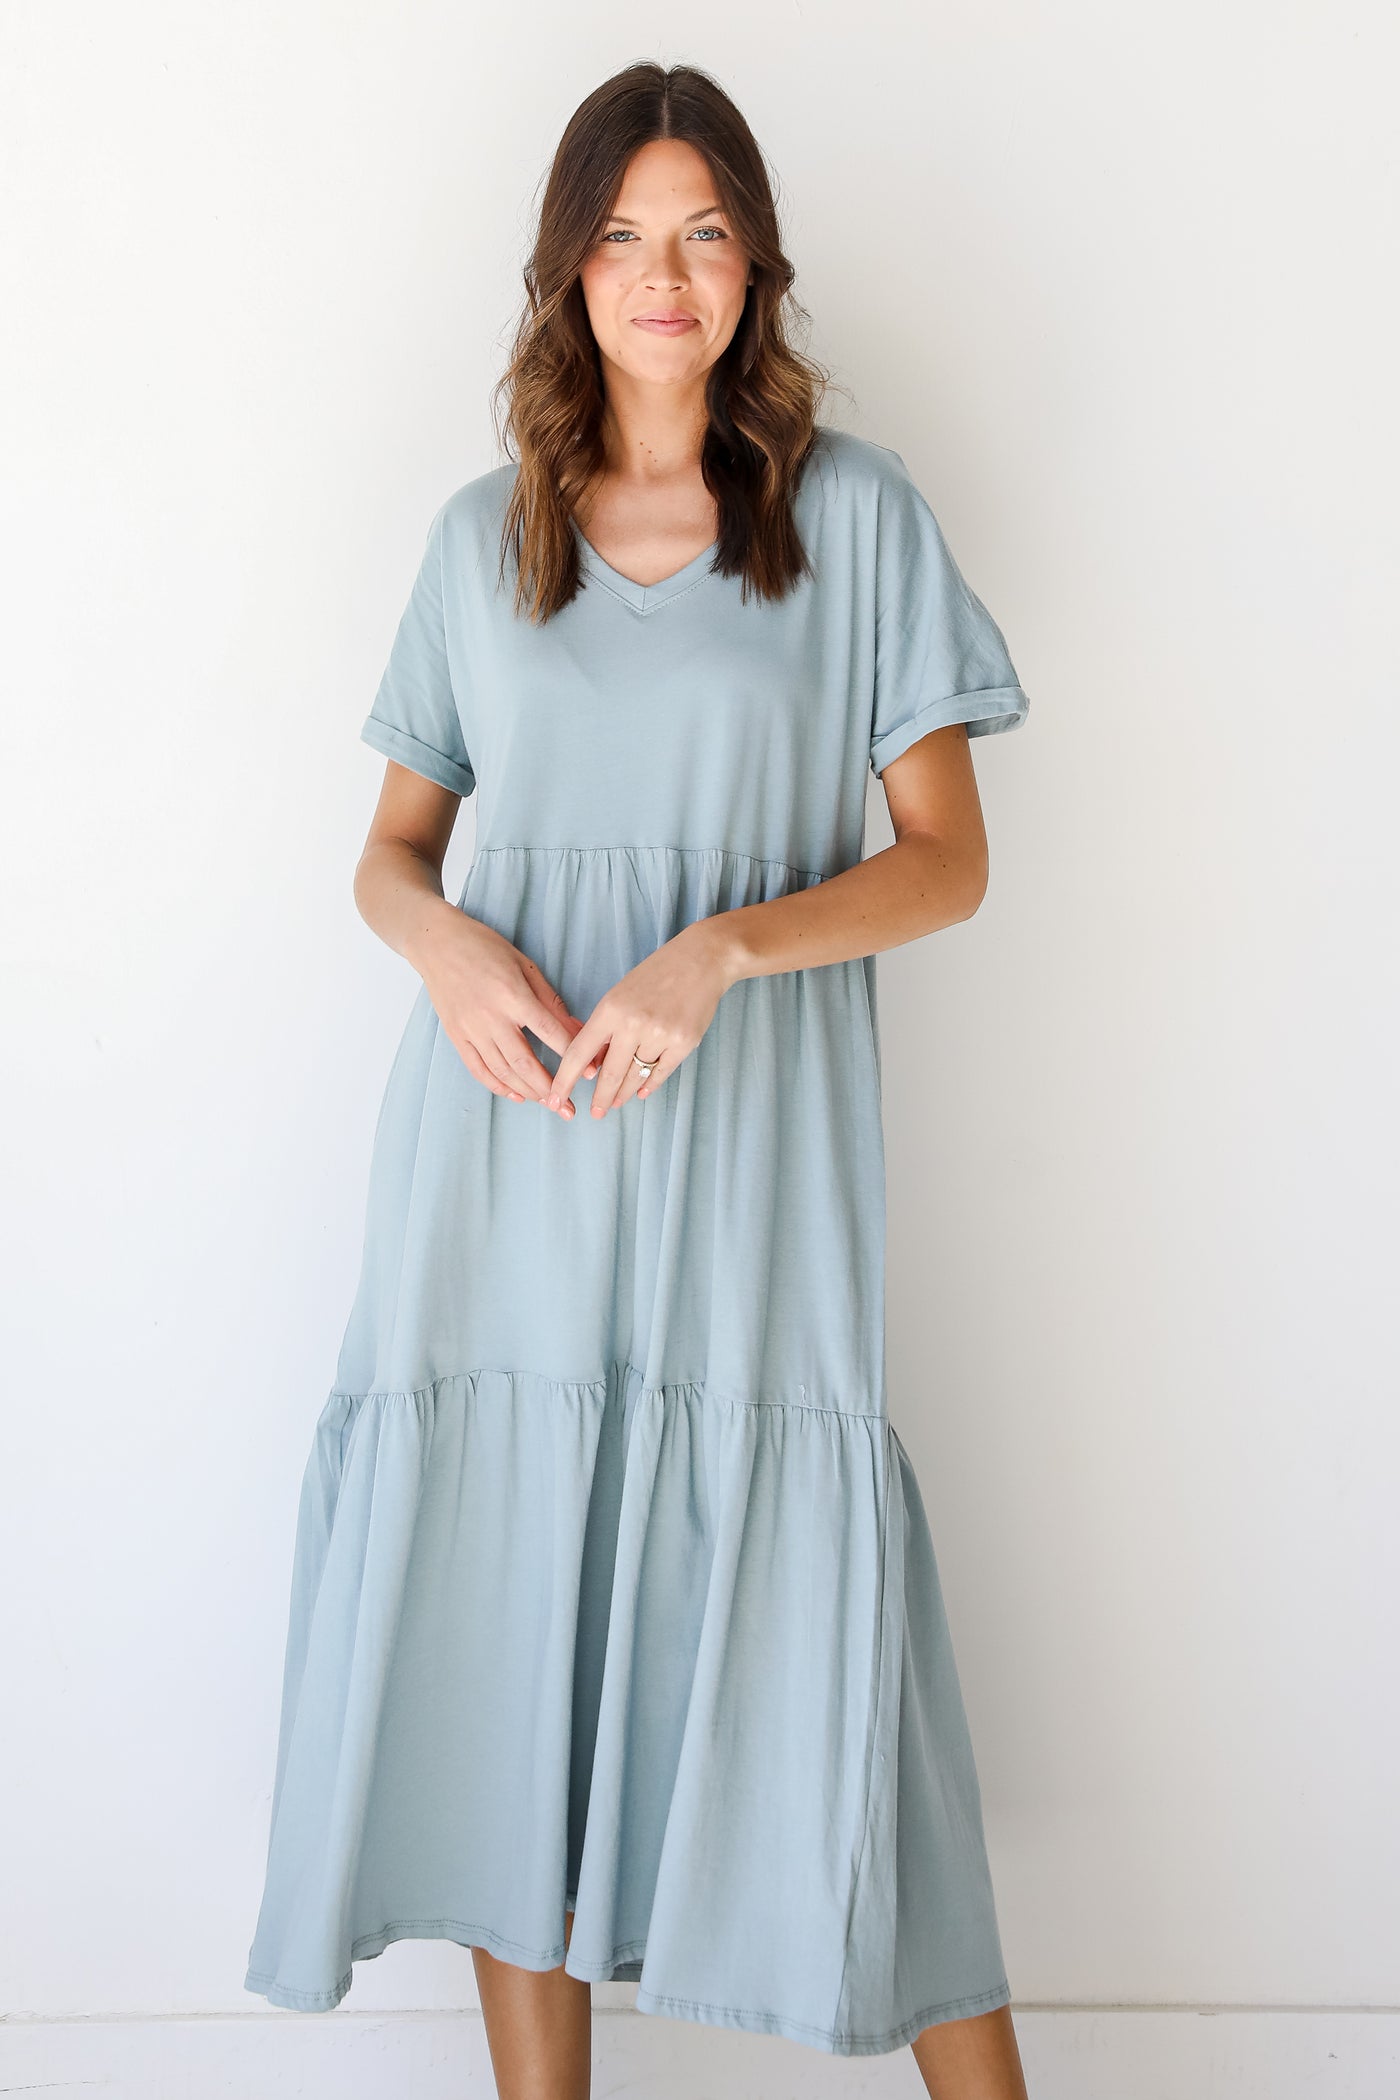 Tiered Midi Dress in mint front view